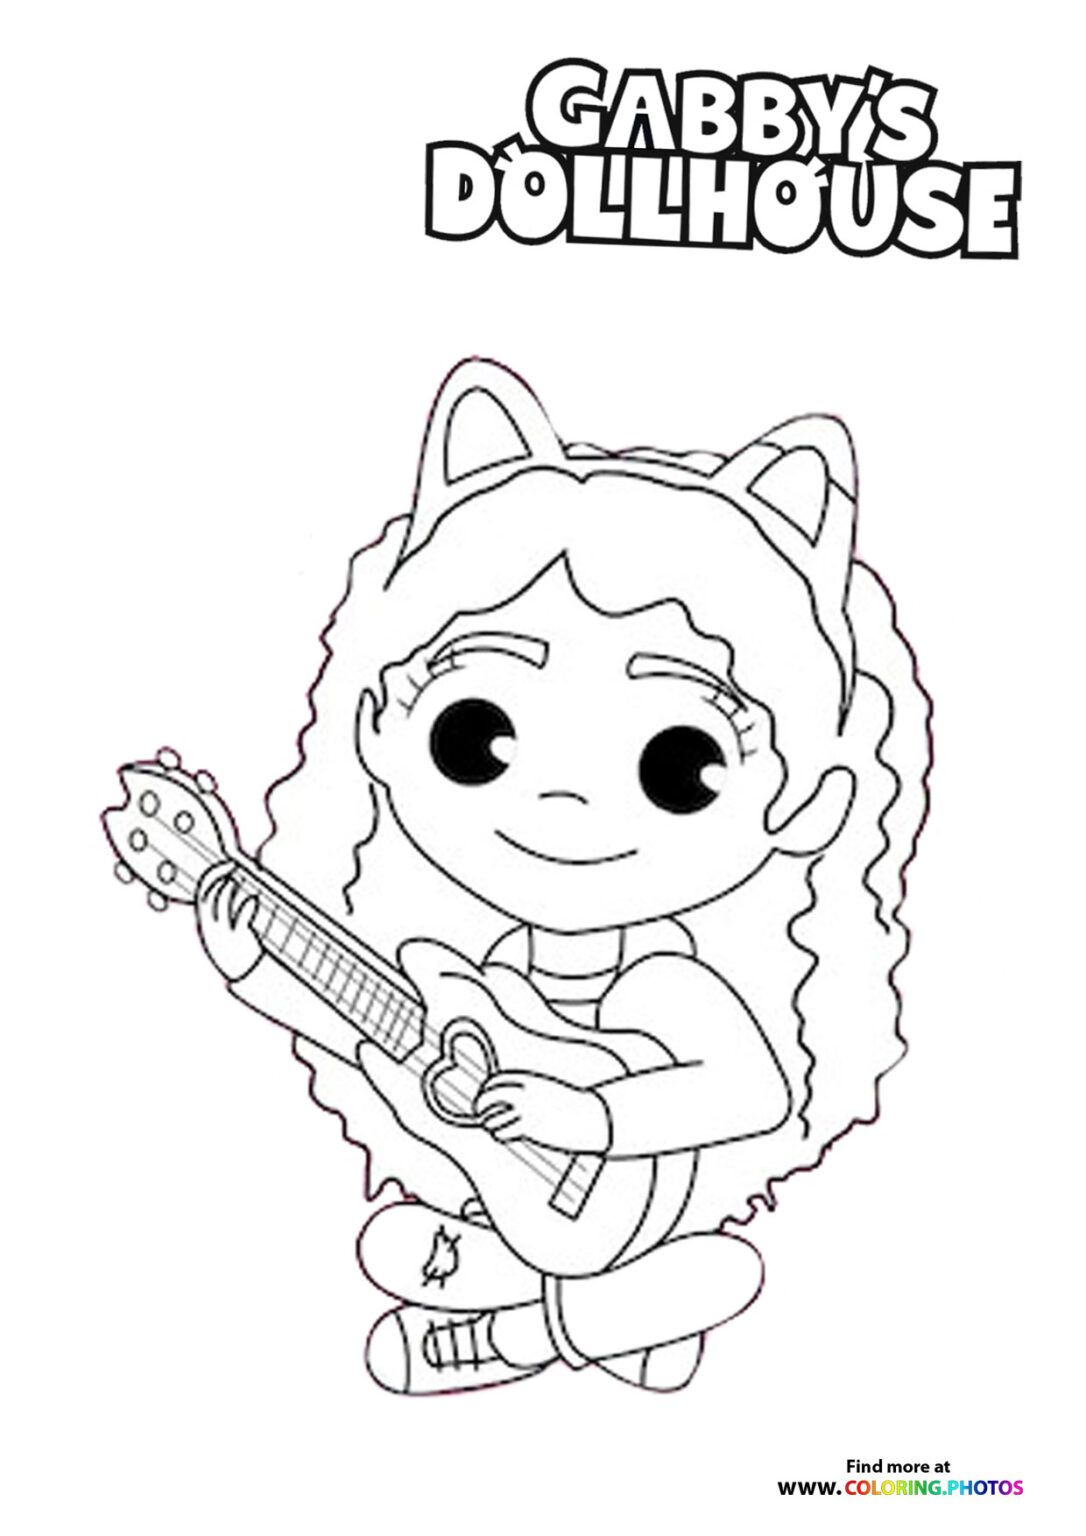 Gaby's Dollhouse coloring pages | Free ...